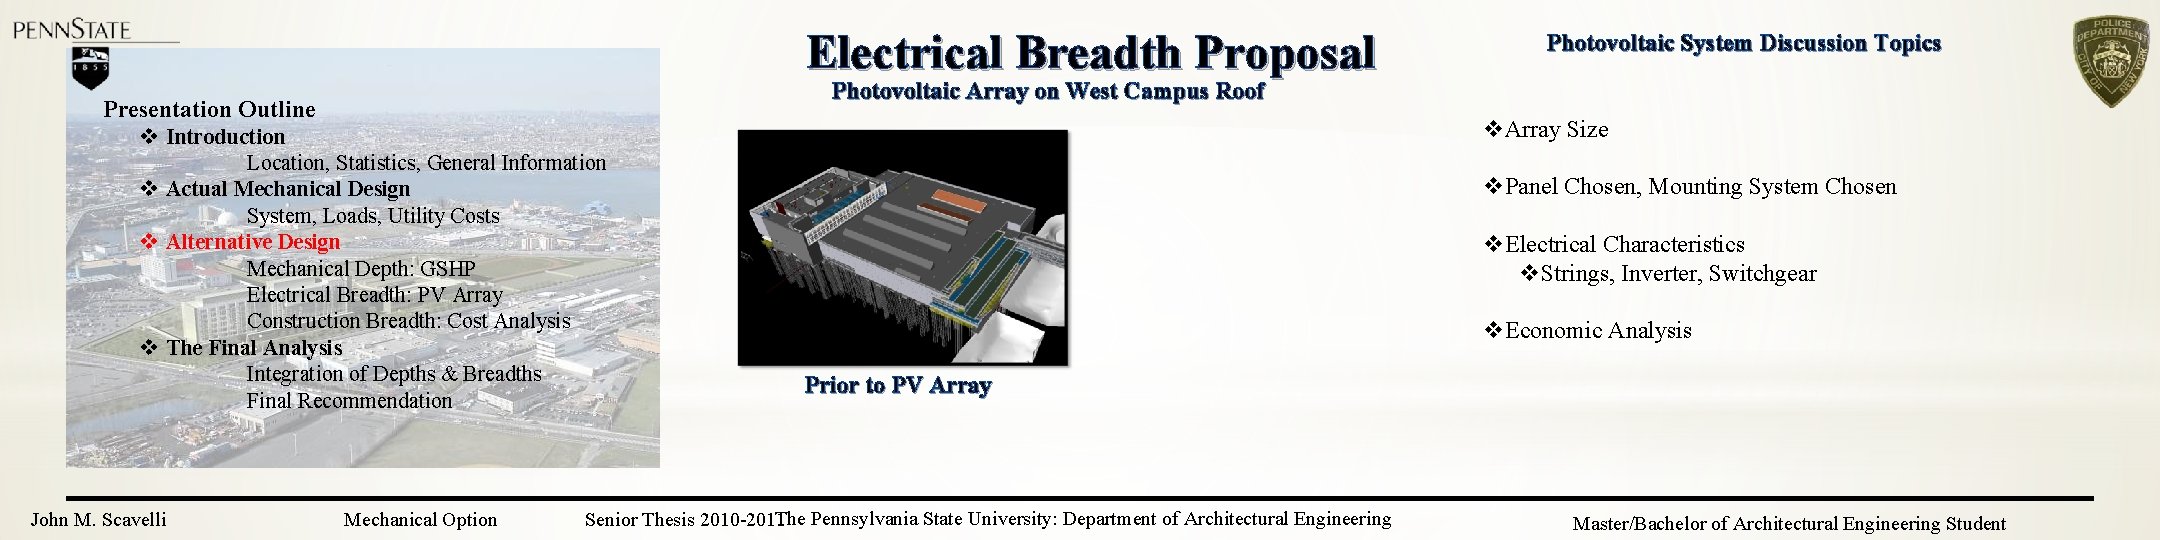 Electrical Breadth Proposal Photovoltaic Array on West Campus Roof Presentation Outline v Introduction Location,